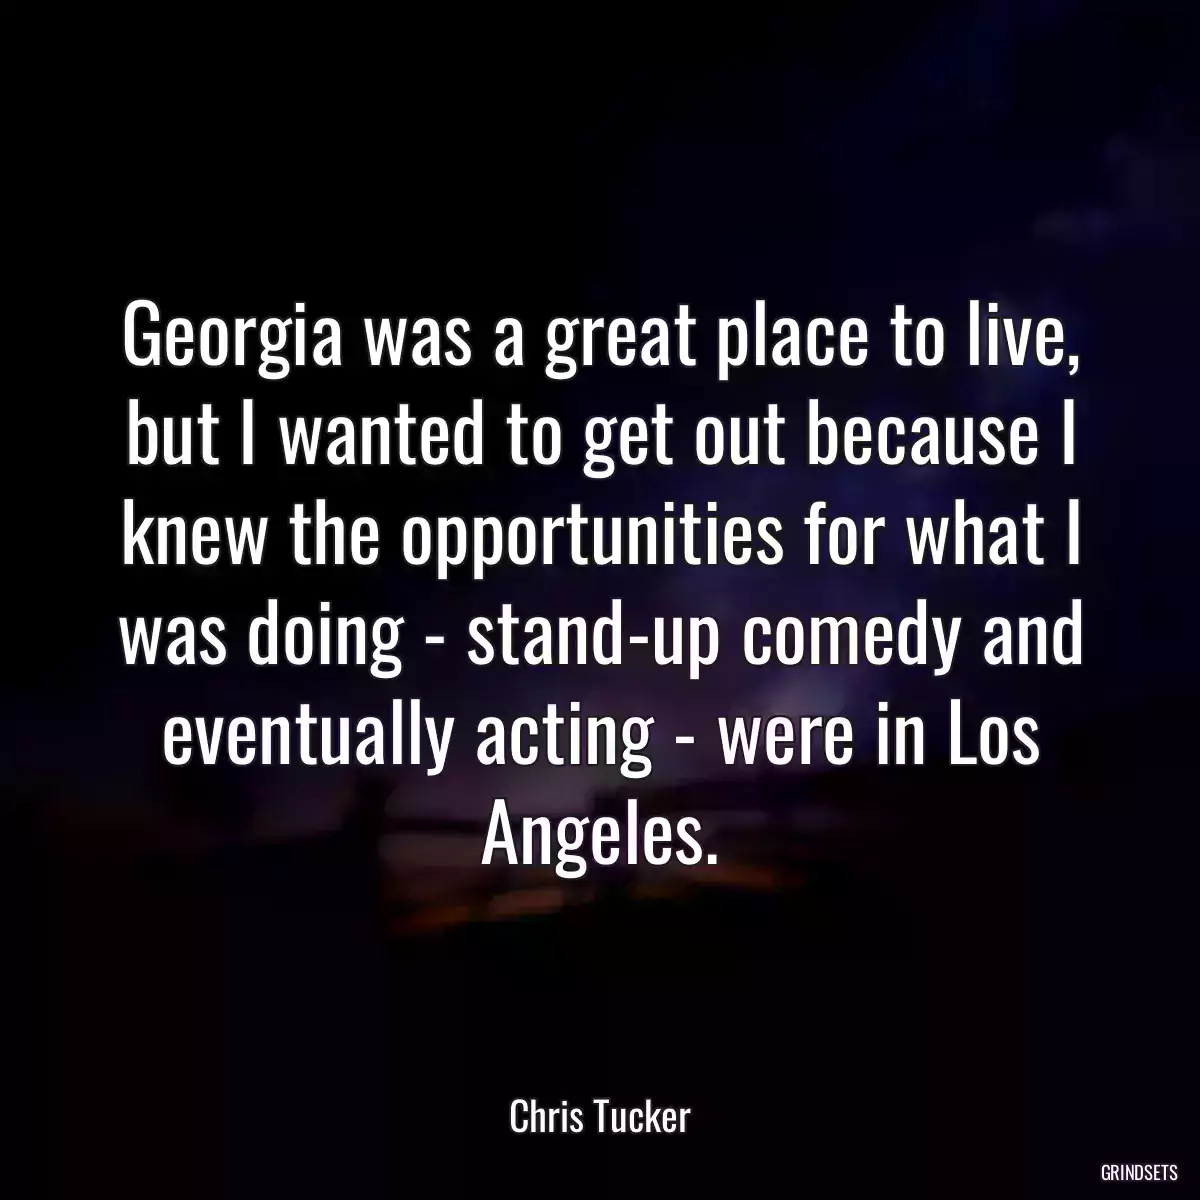 Georgia was a great place to live, but I wanted to get out because I knew the opportunities for what I was doing - stand-up comedy and eventually acting - were in Los Angeles.